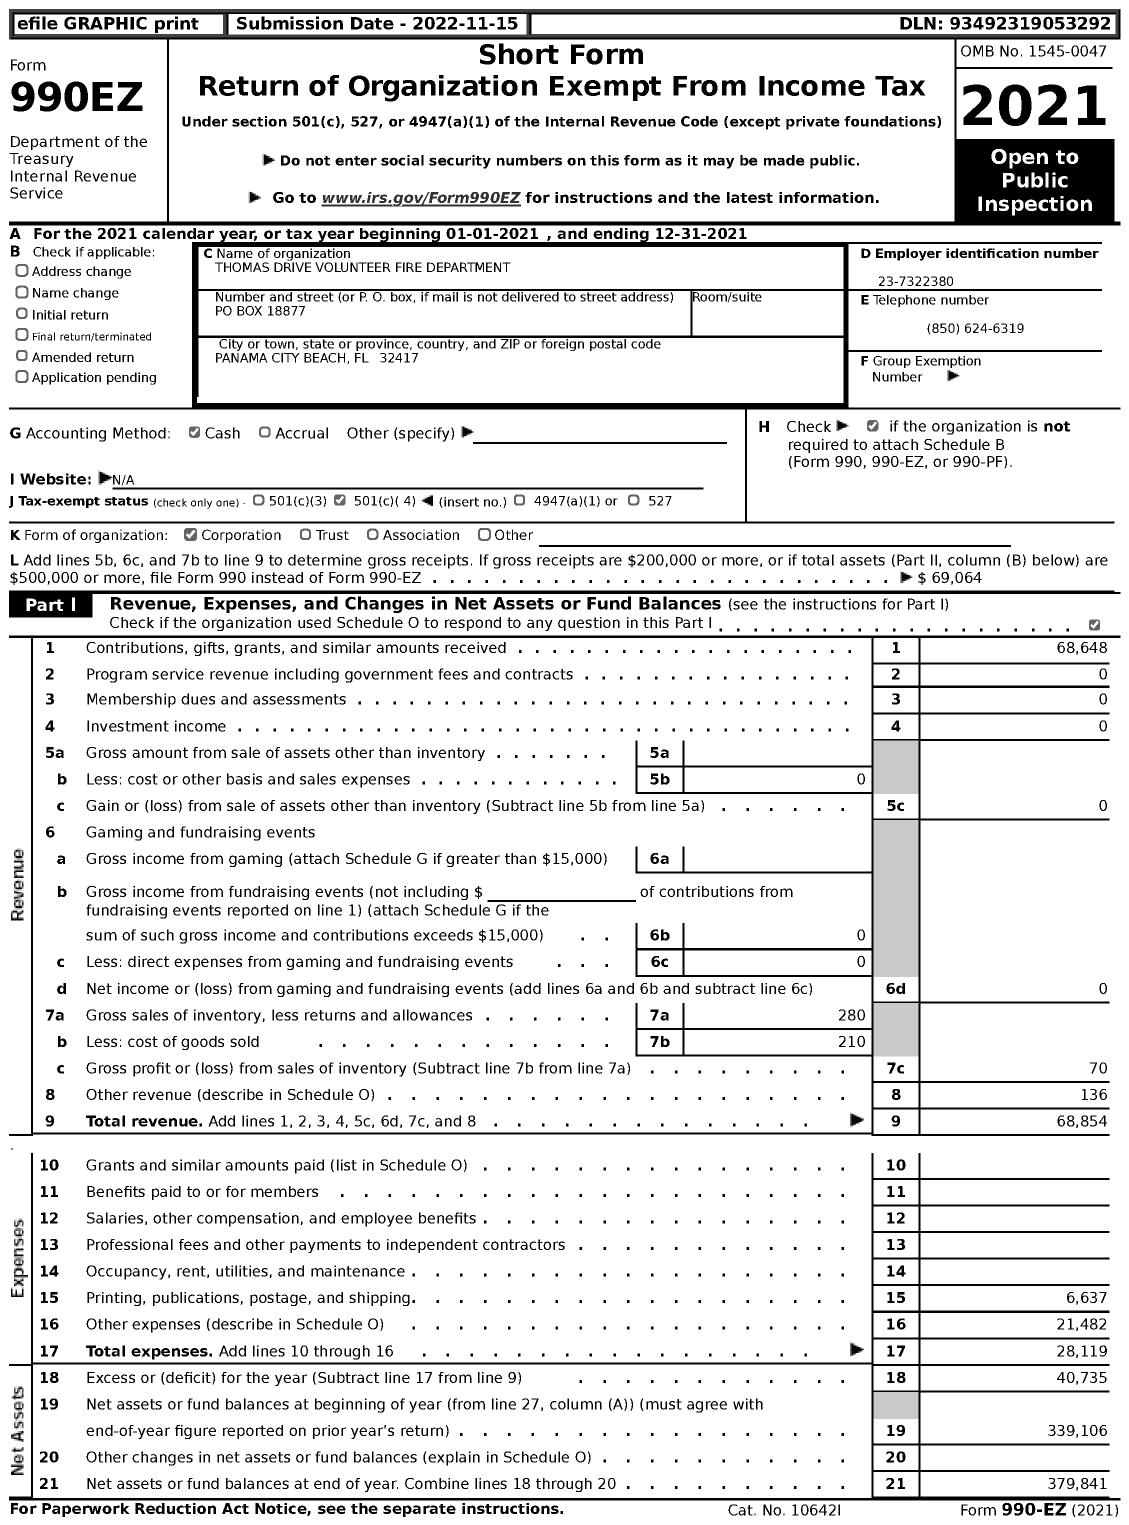 Image of first page of 2021 Form 990EZ for Thomas Drive Volunteer Fire Department